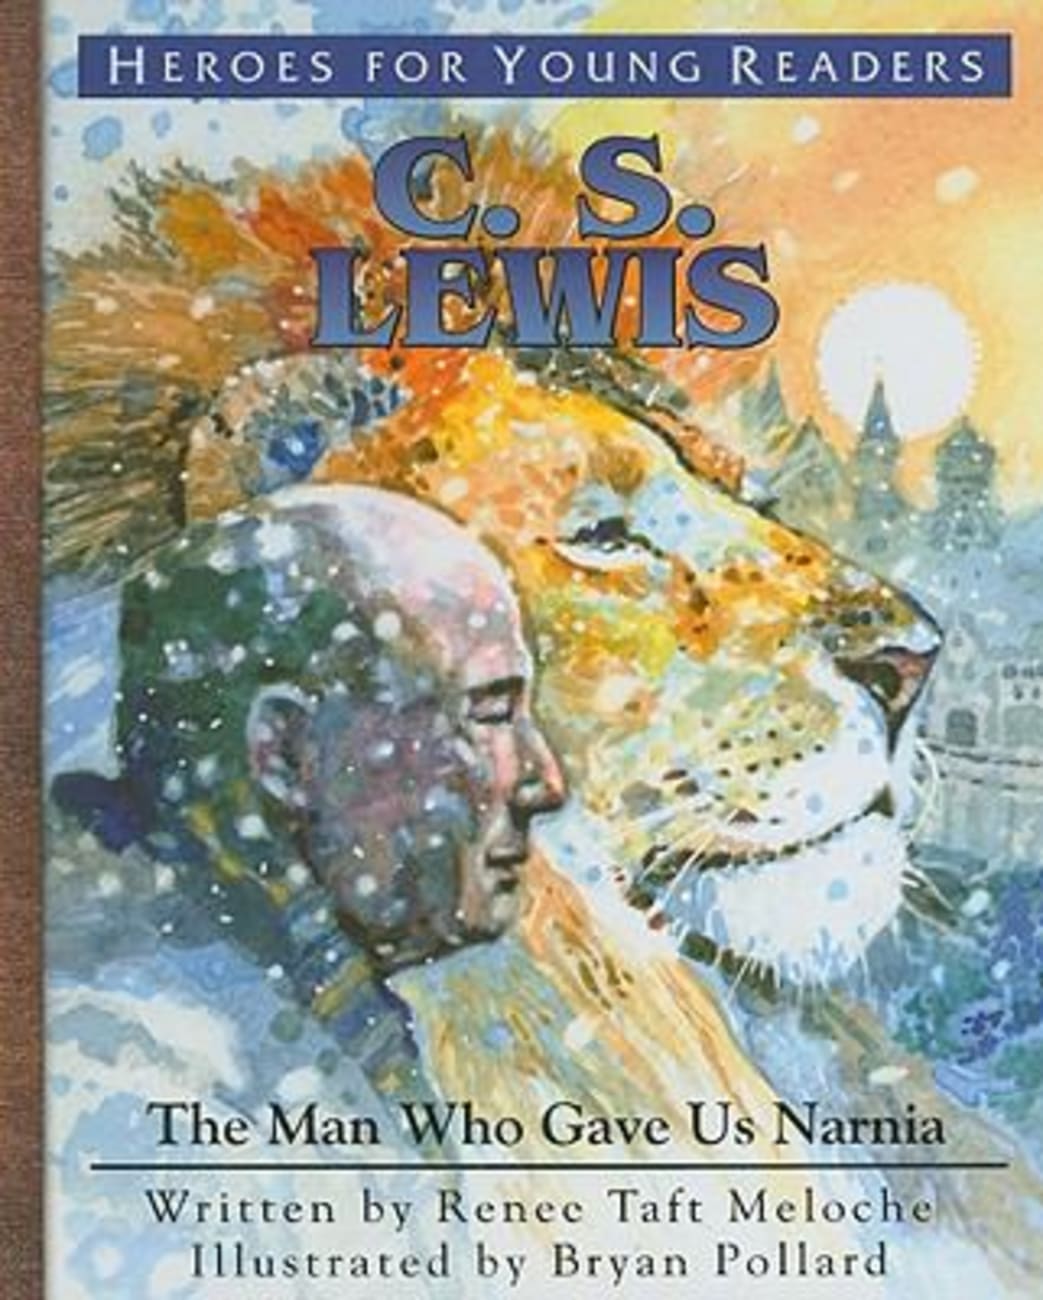 C.S. Lewis - the Man Who Gave Us Narnia (Heroes For Young Readers Series) Hardback